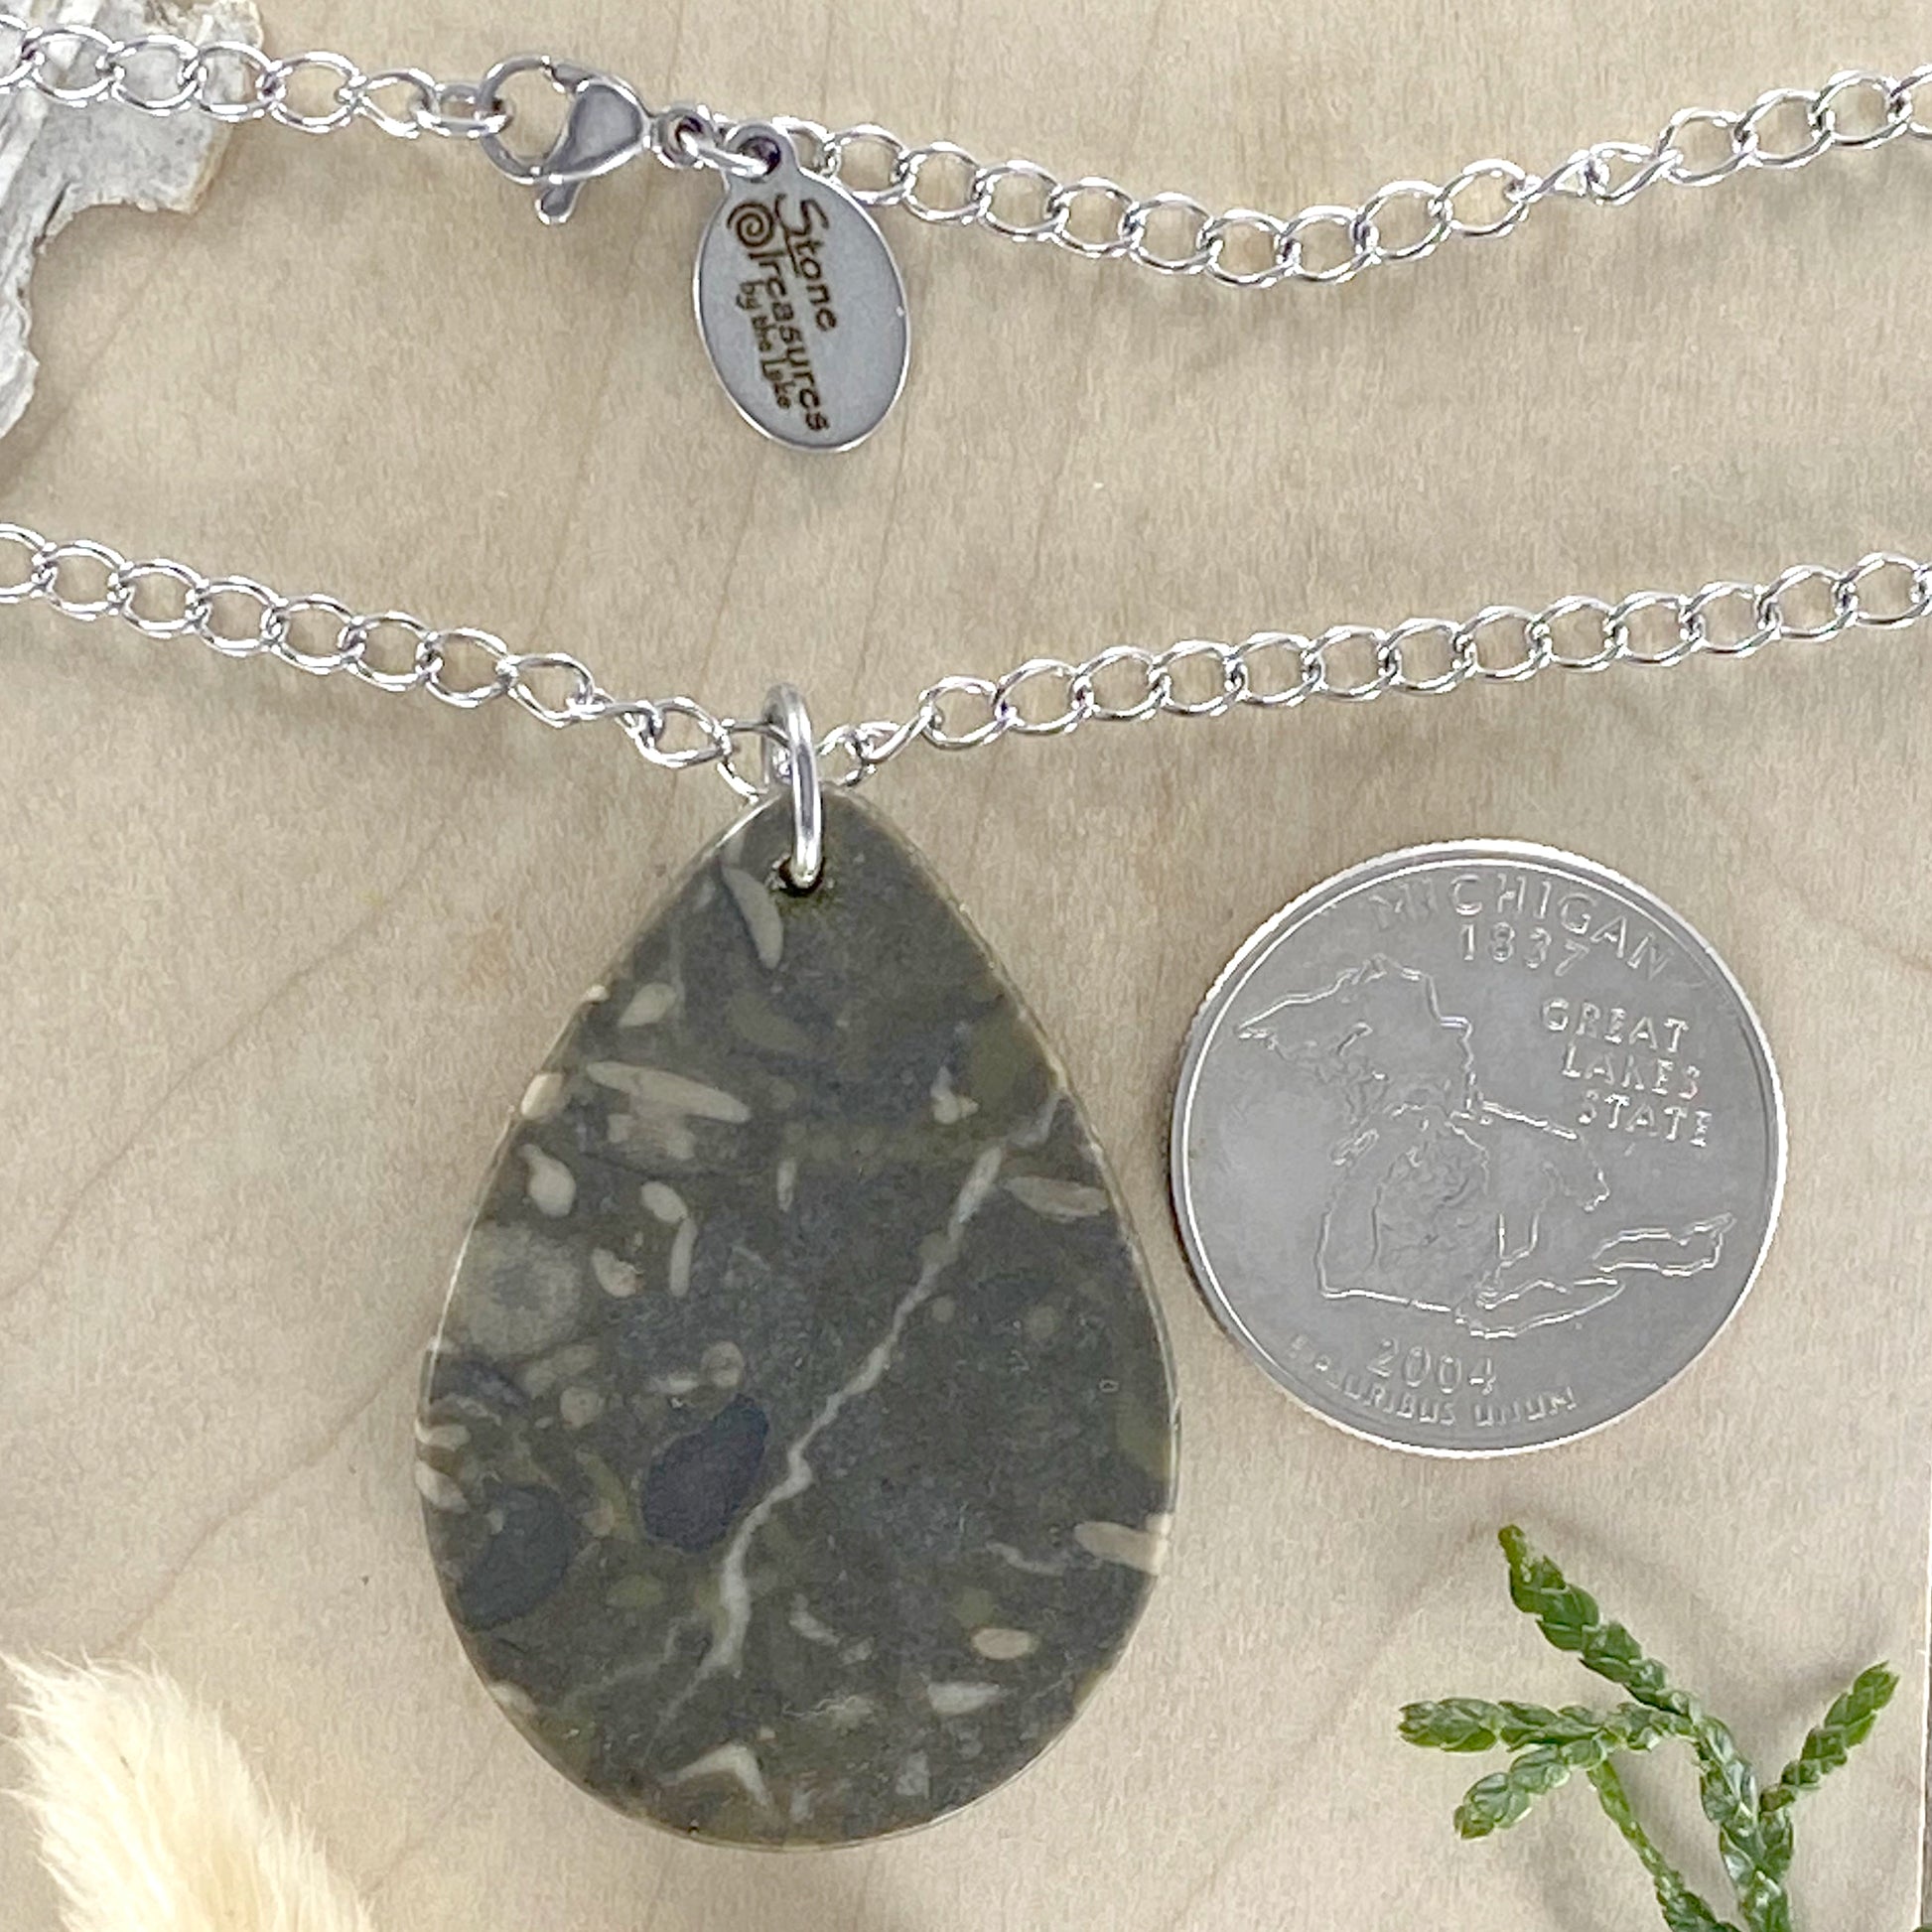 Fossil Hash Swirl Pendant Necklace - Stone Treasures by the Lake